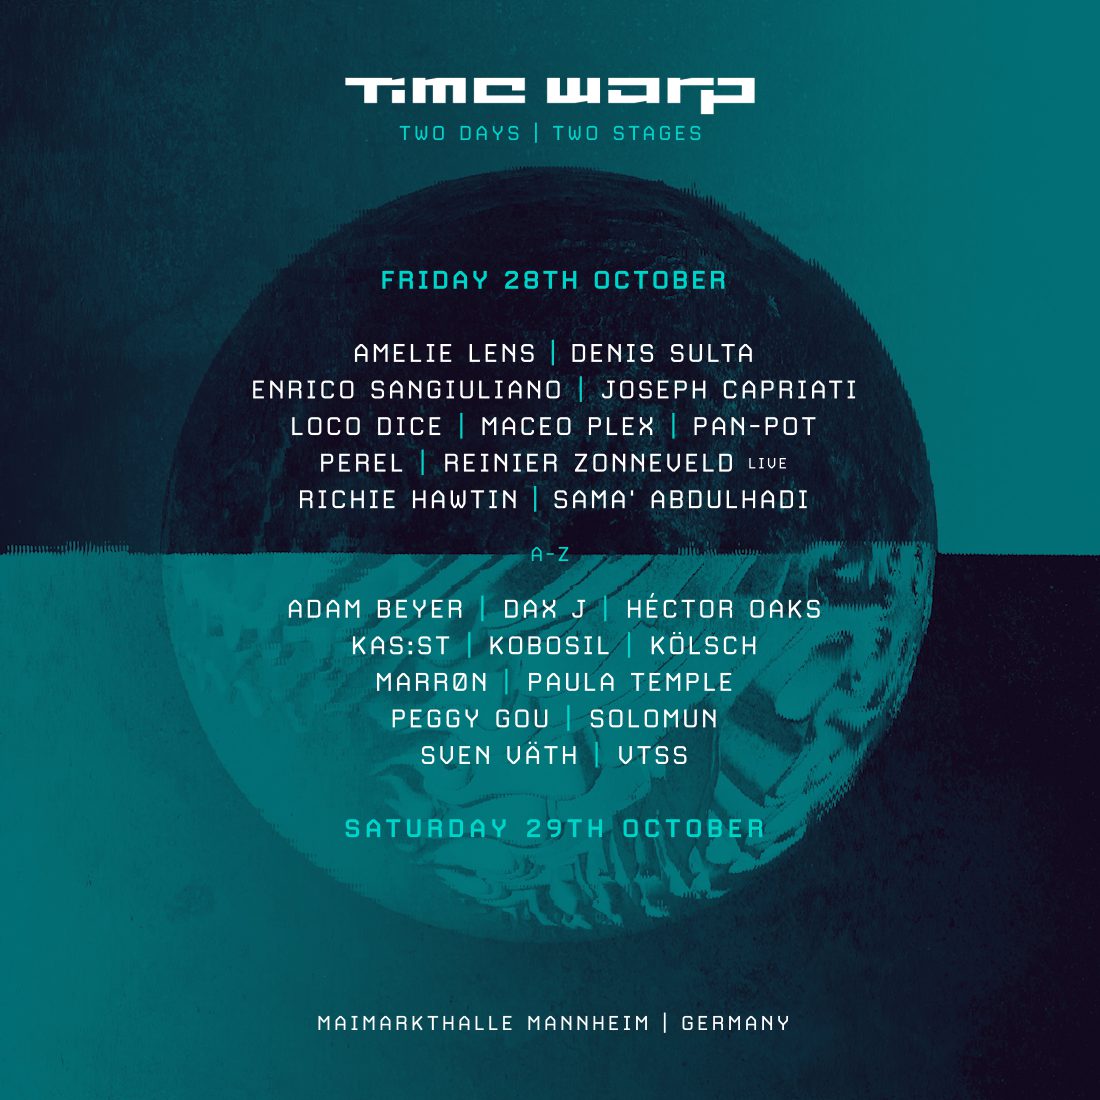 Time Warp Announces Return of the 'Two Days Two Stages' Concept EDM